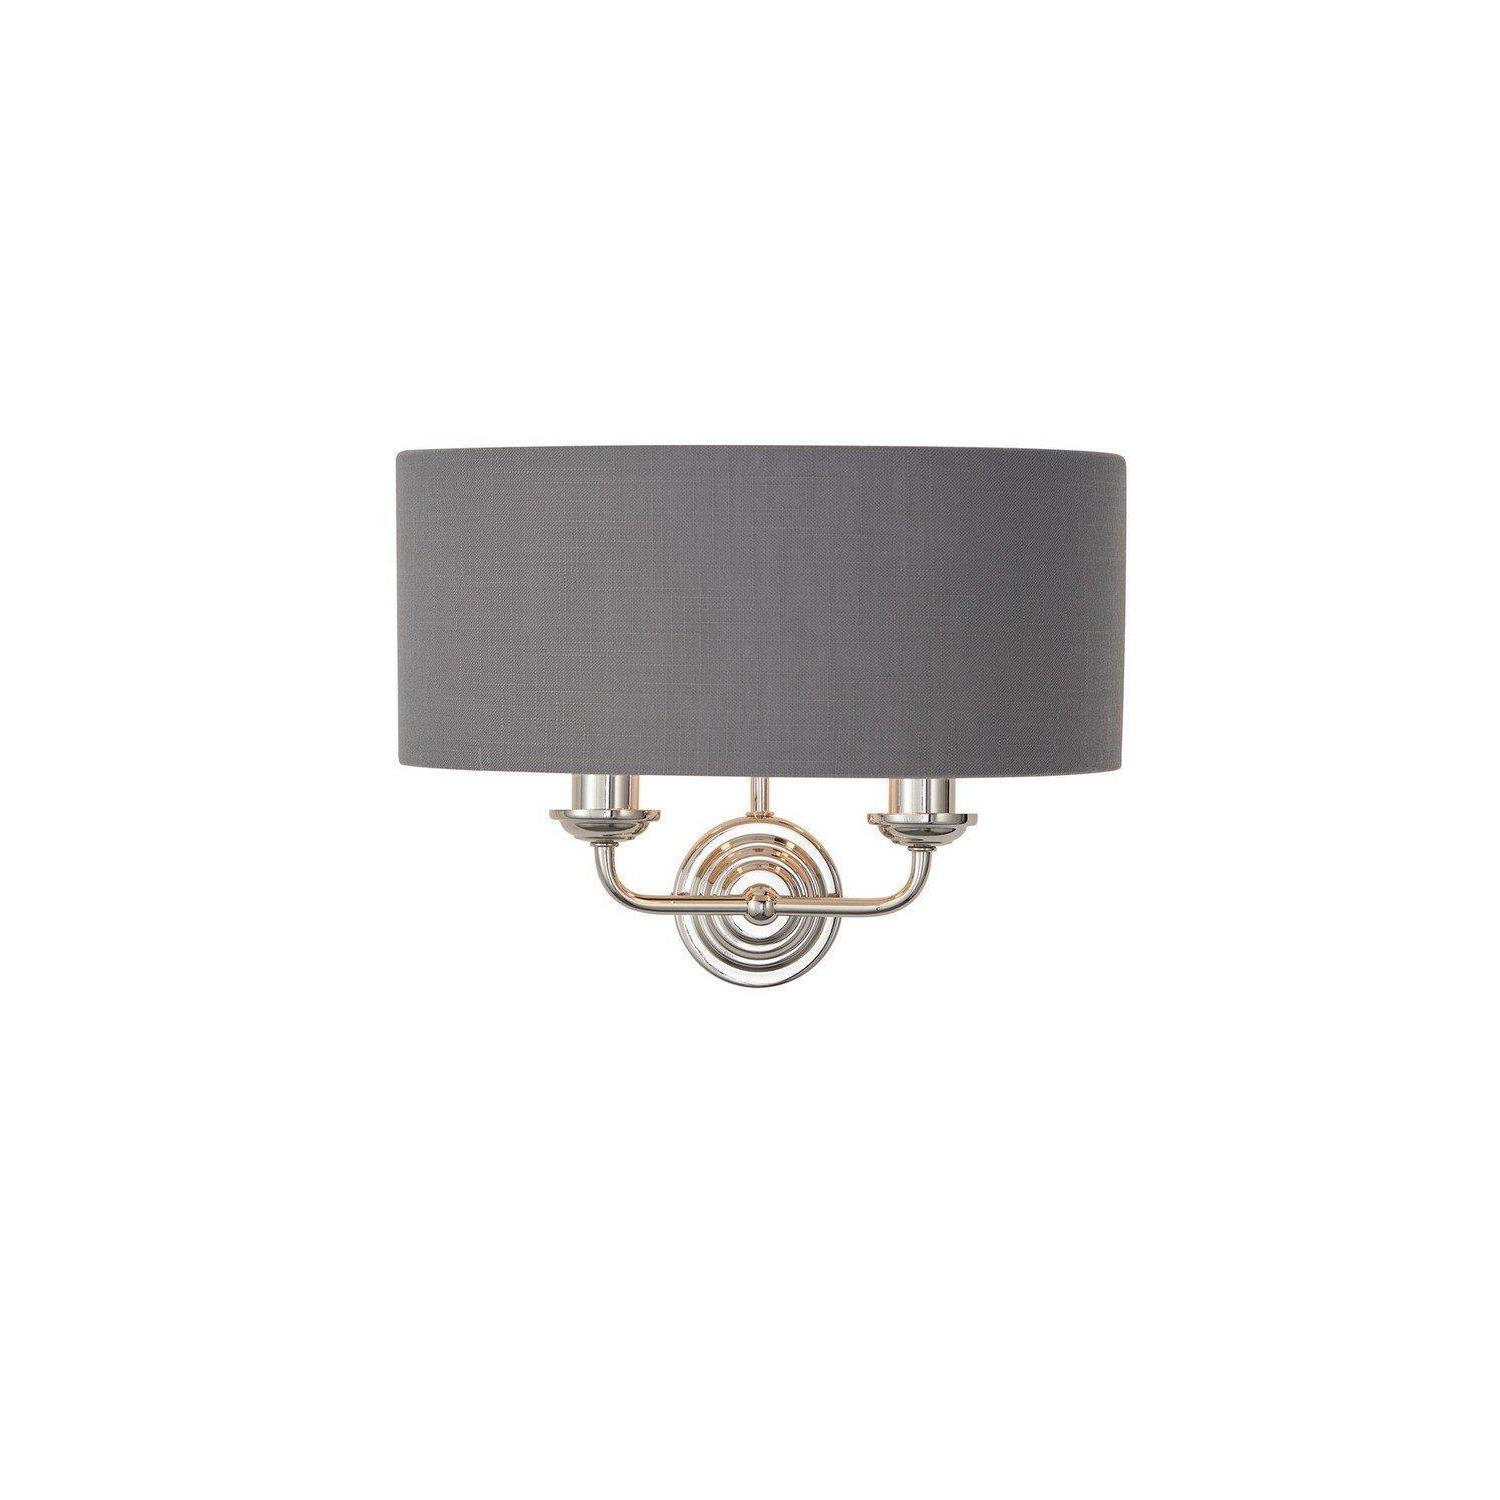 Highclere Shade Wall Lamp Bright Nickel Plate Charcoal Fabric - image 1